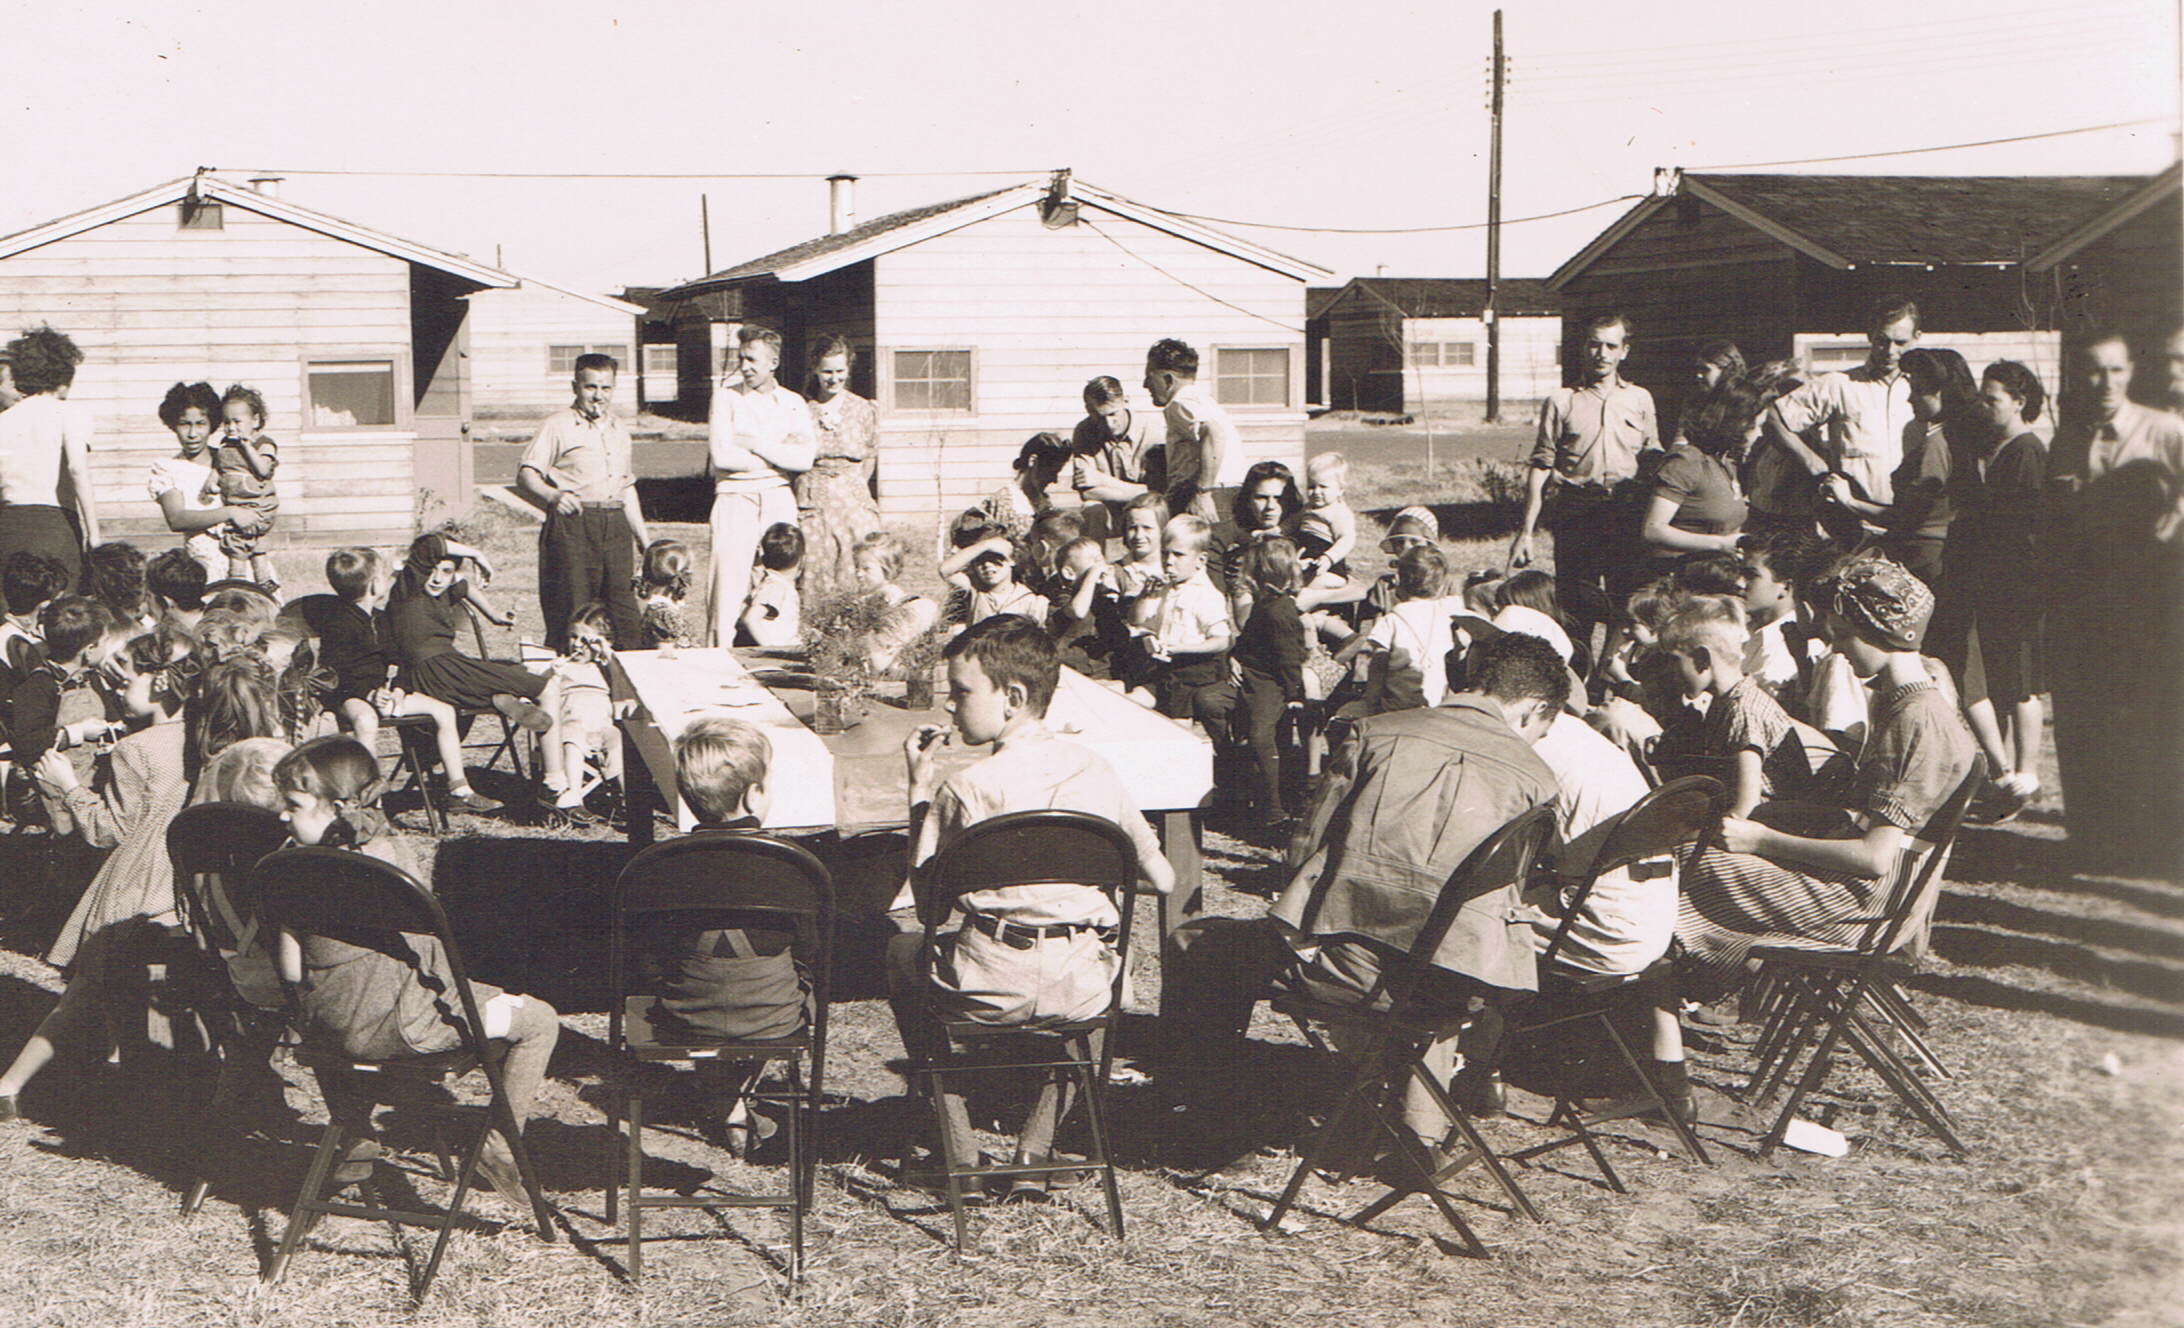 children and adults around outdoor table with living huts in background